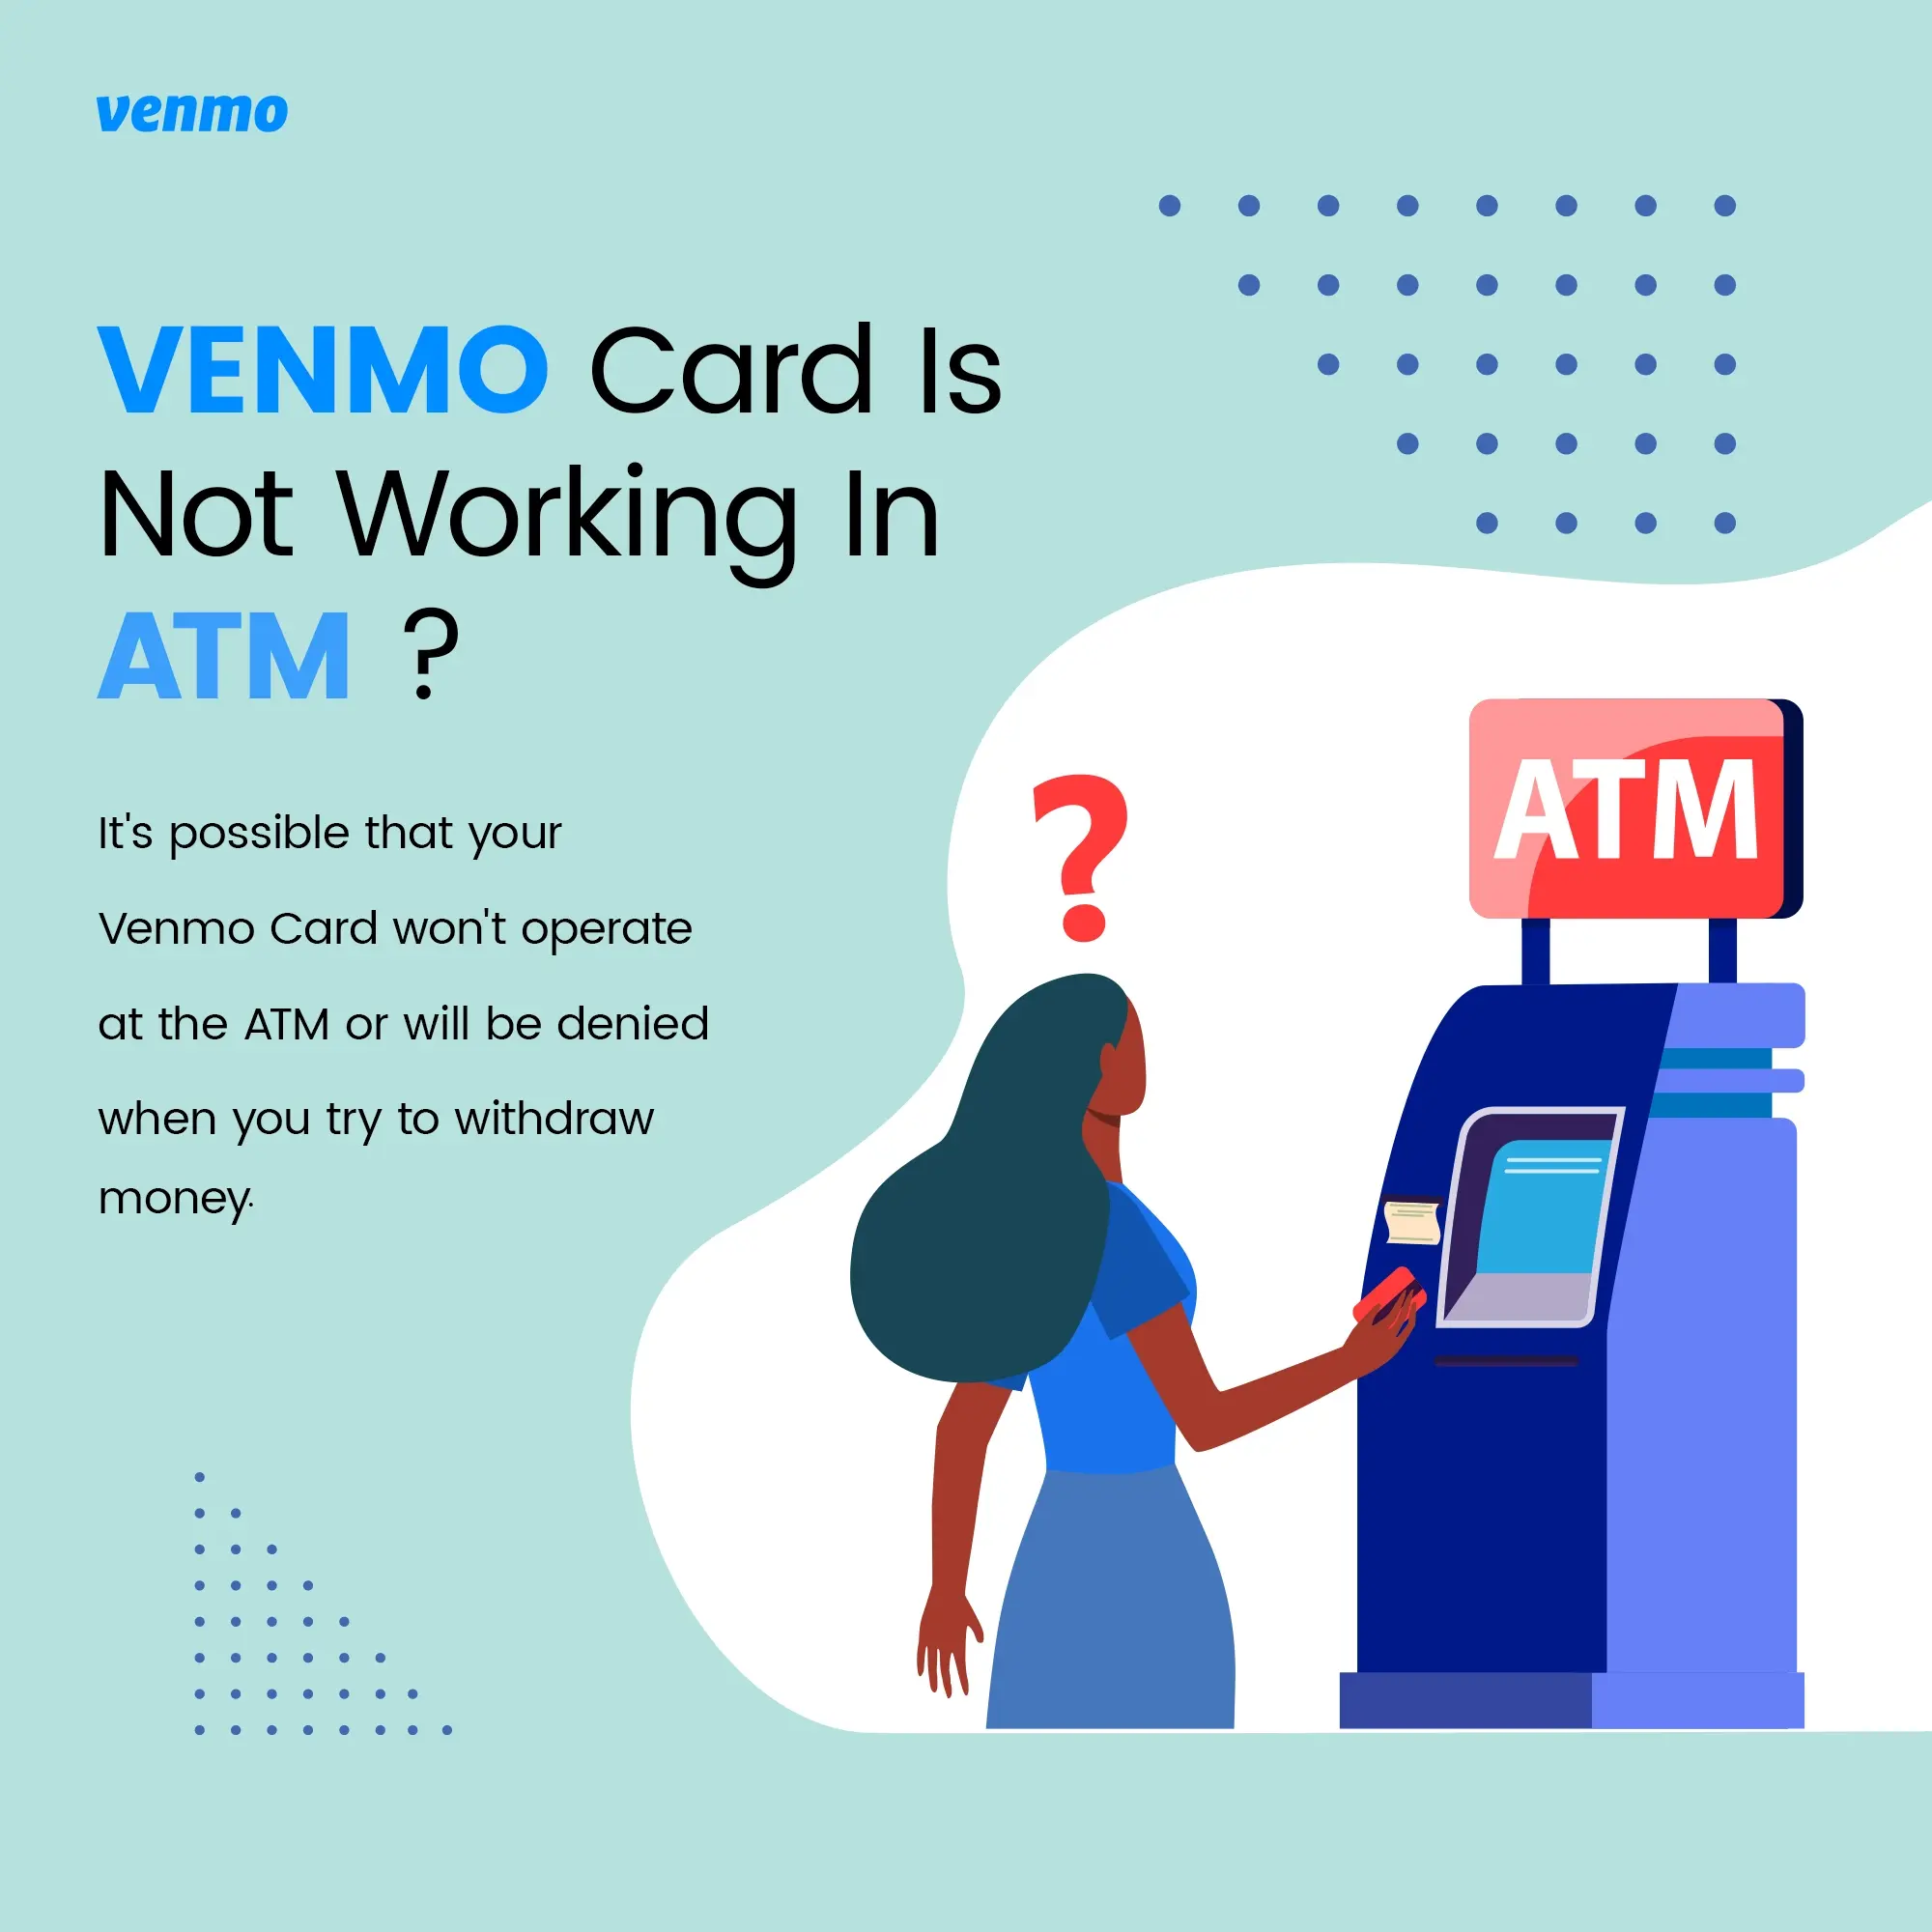 Venmo Card not Working at ATM